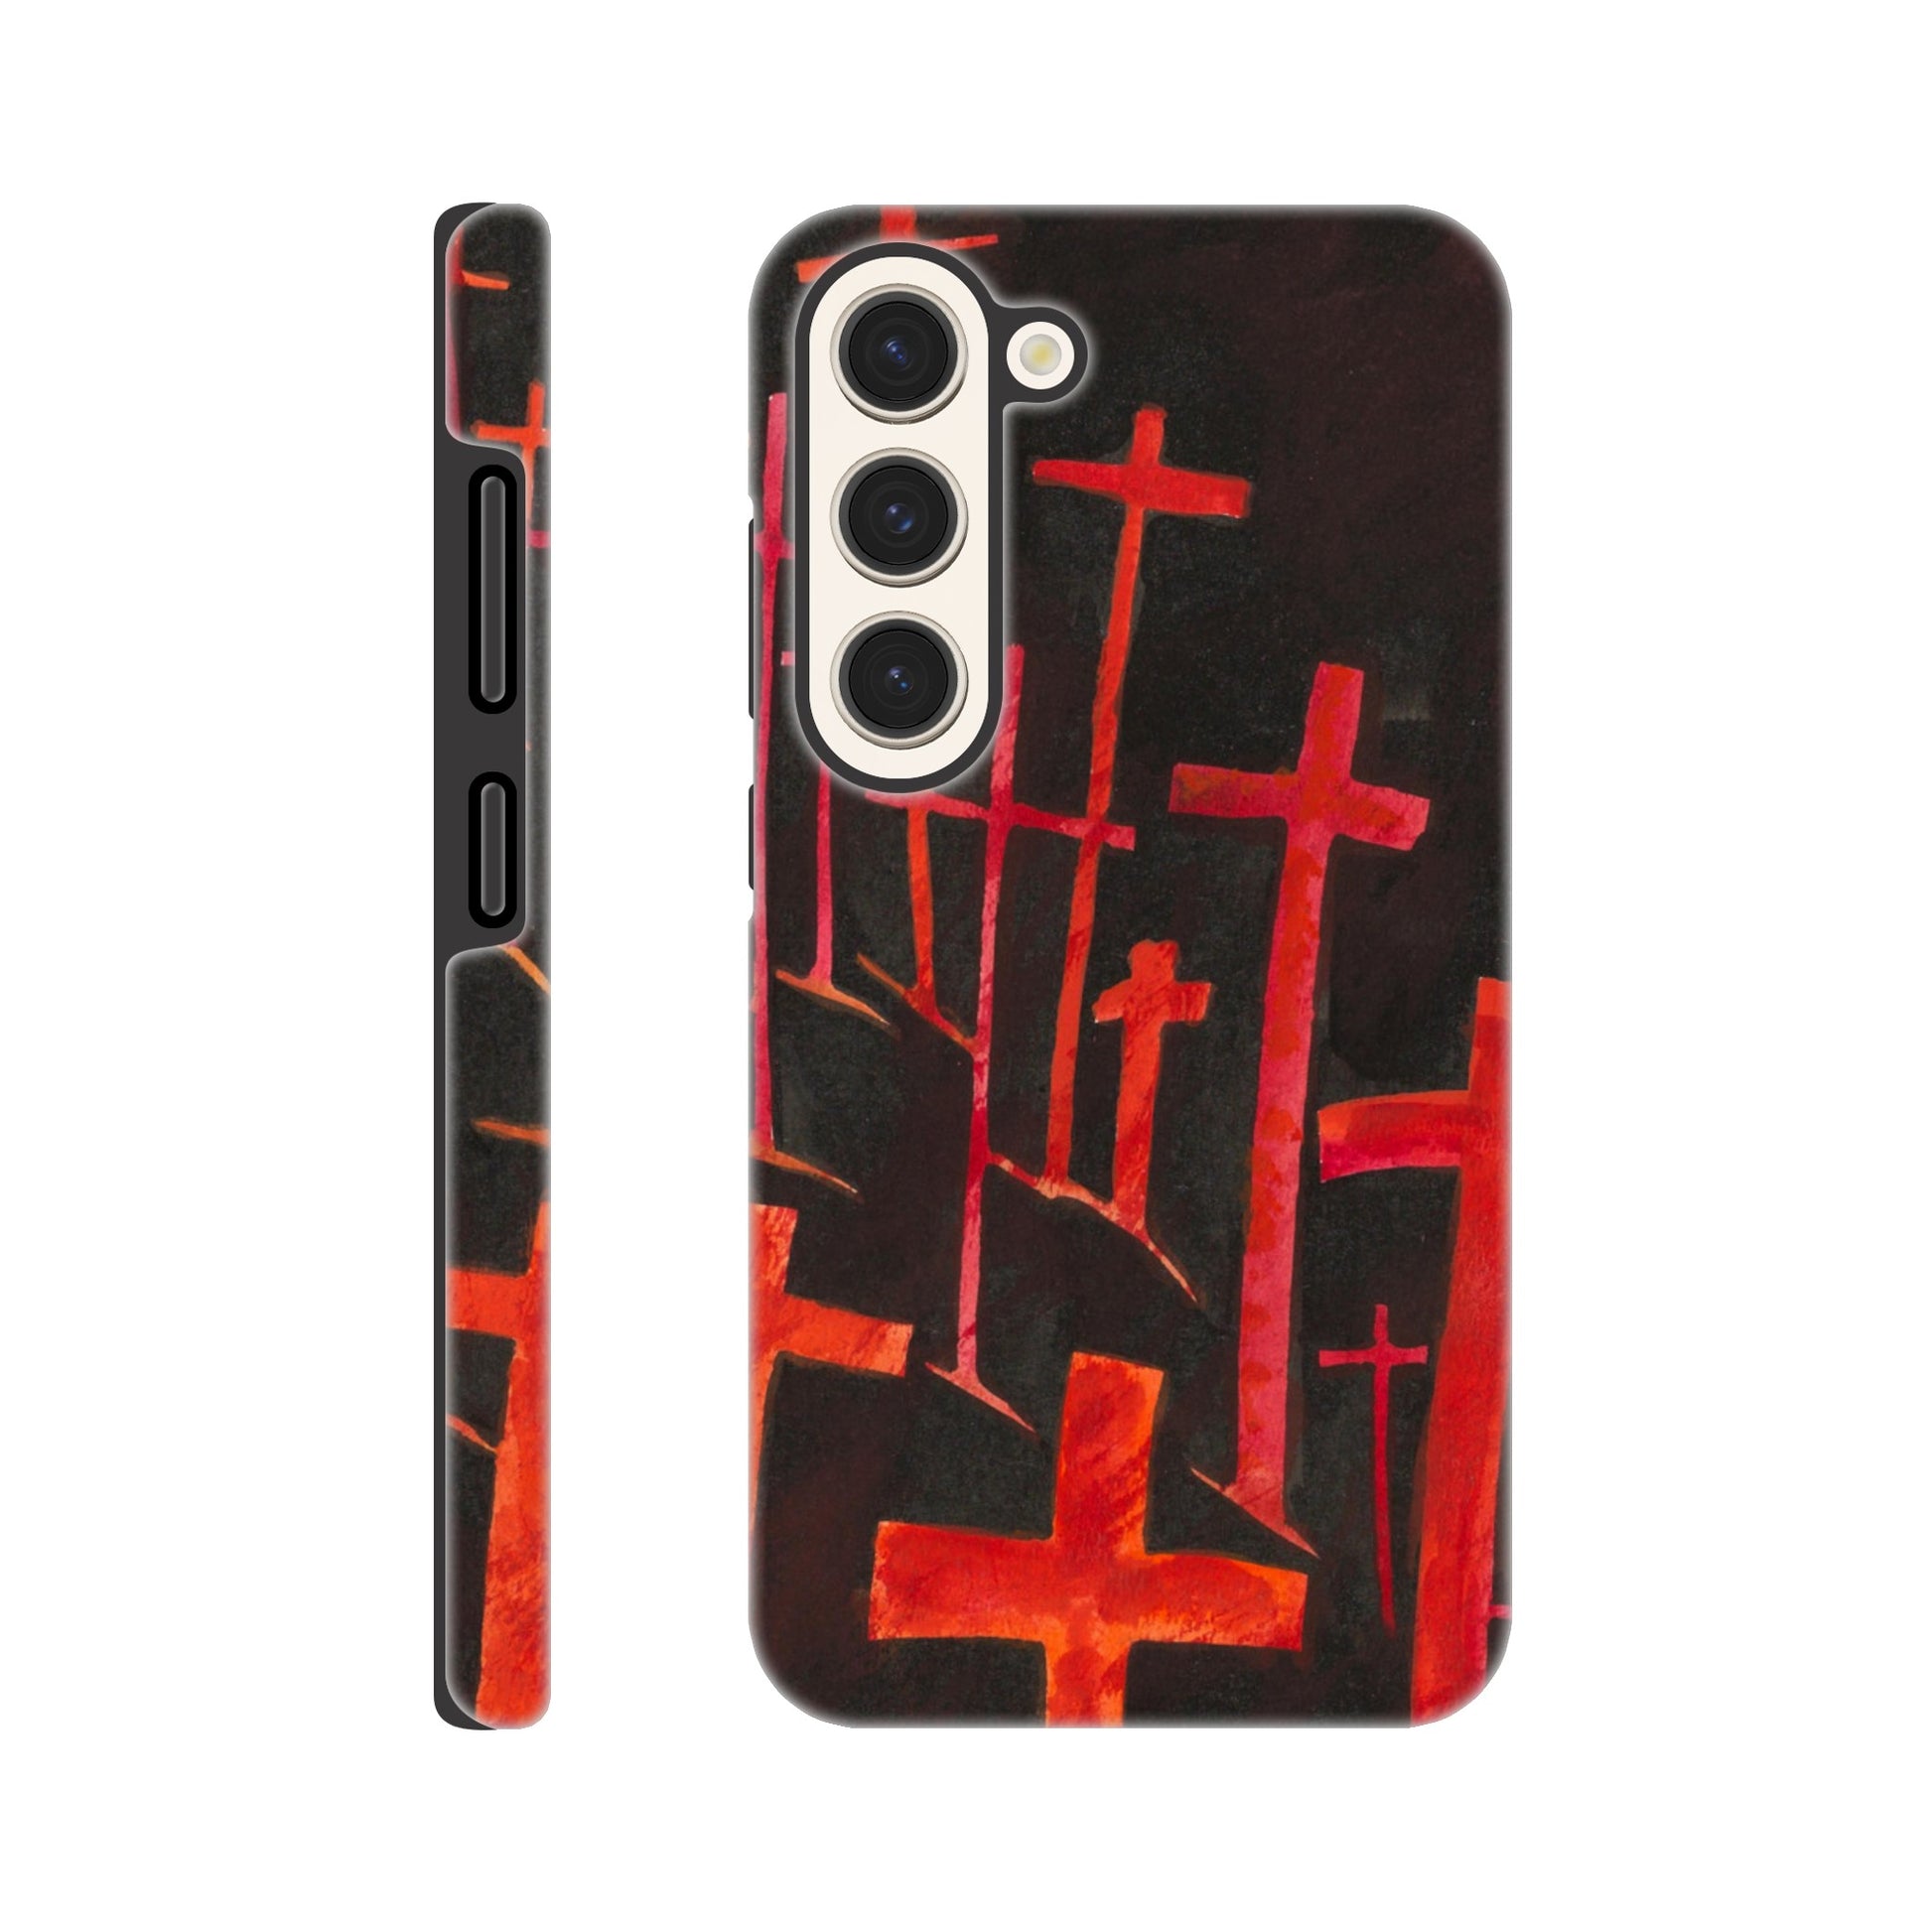 a phone case with a cross design on it